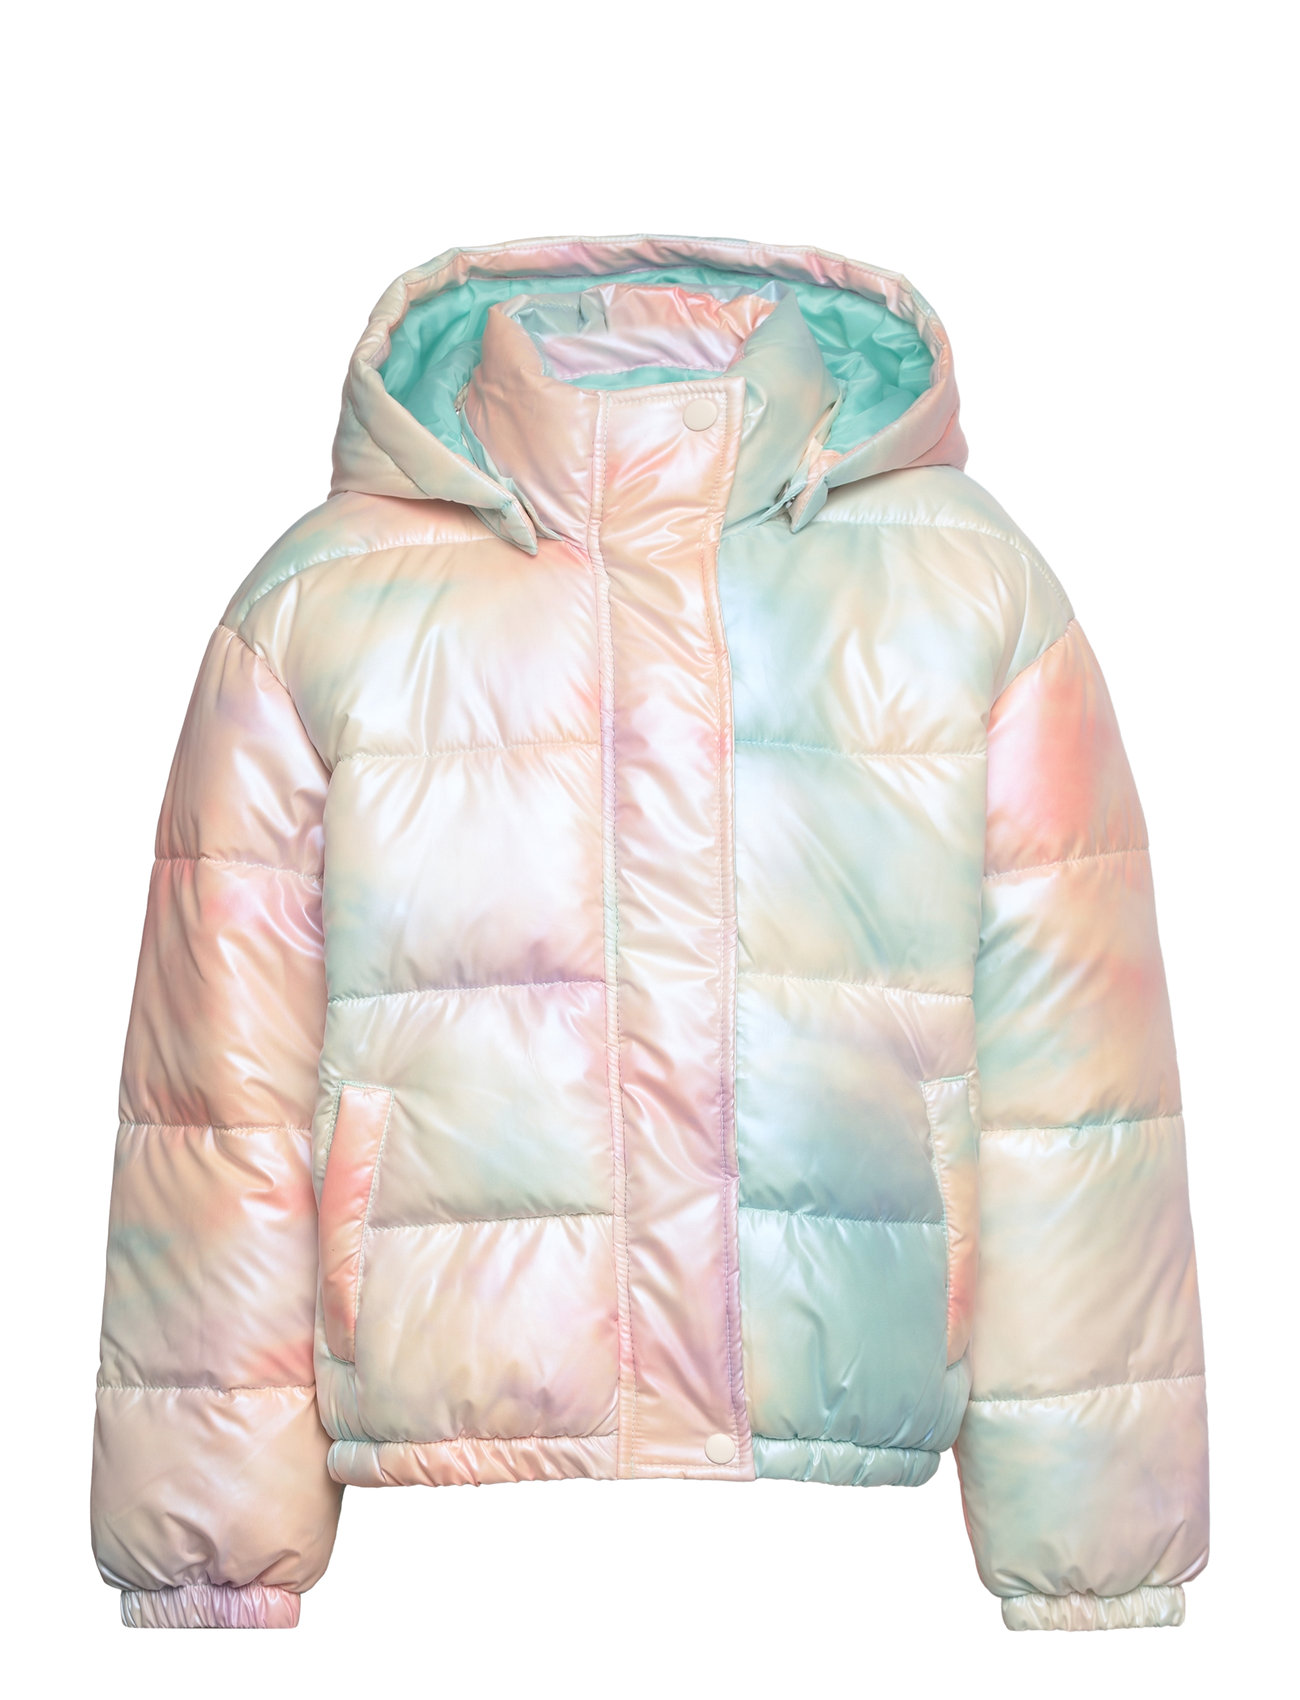 name it Nkfmash Puffer Jacket - 31.50 €. Buy Puffer & Padded from name it  online at Boozt.com. Fast delivery and easy returns